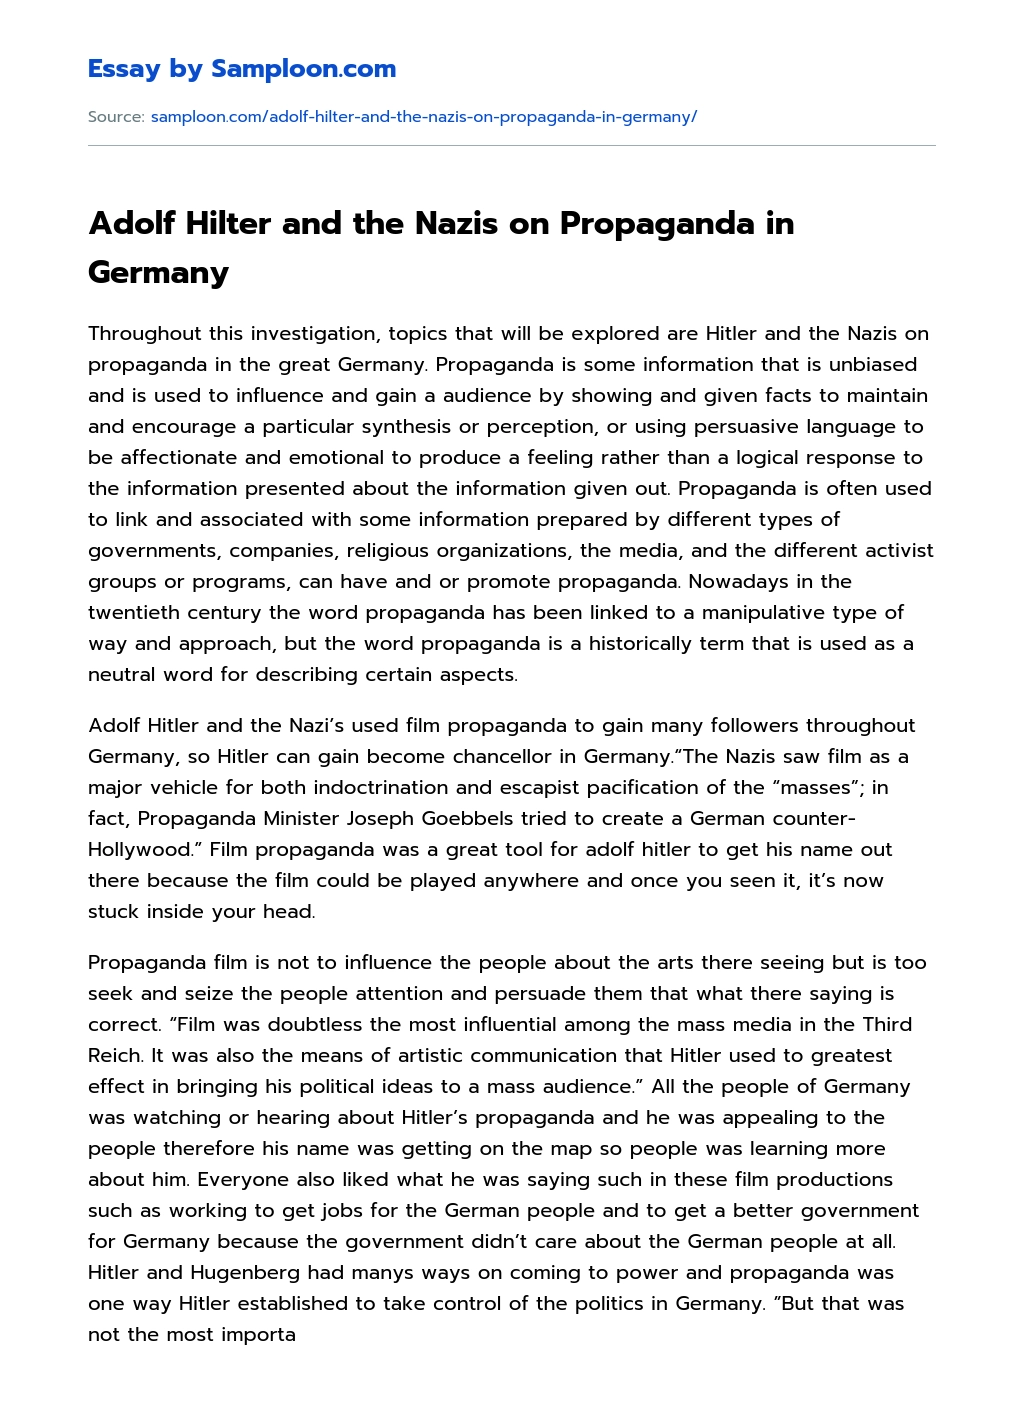 Adolf Hilter and the Nazis on Propaganda in Germany essay